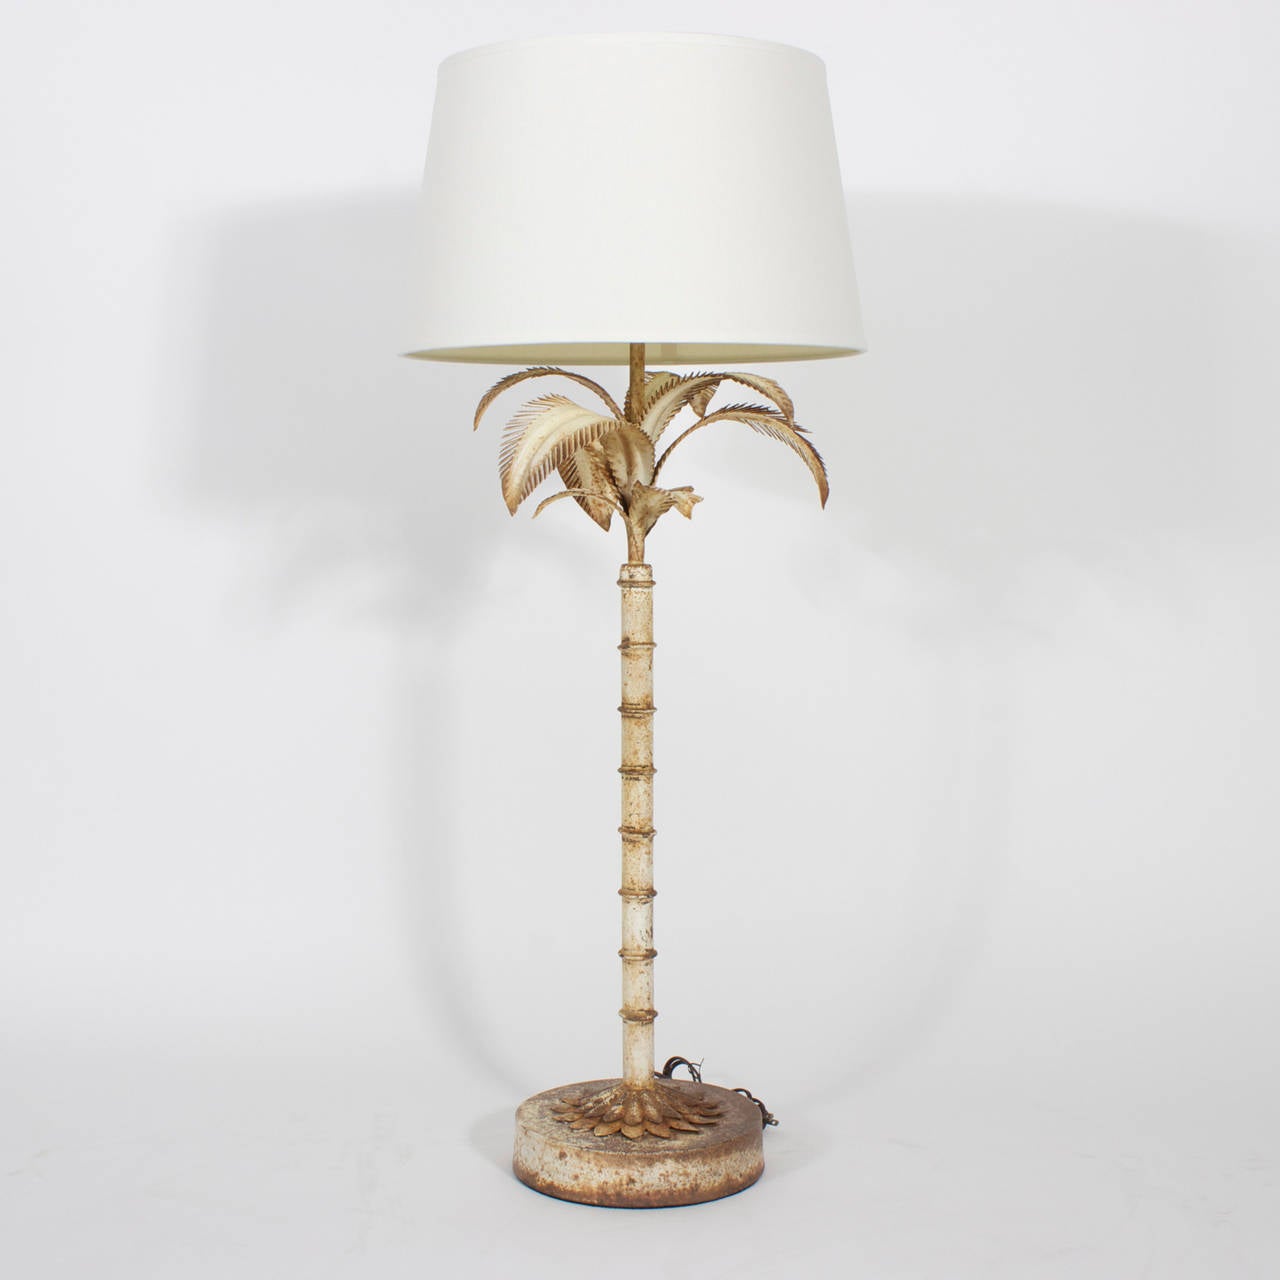 Rustic Pair of Naturally Oxidized Tall Tole Palm Tree Lamps